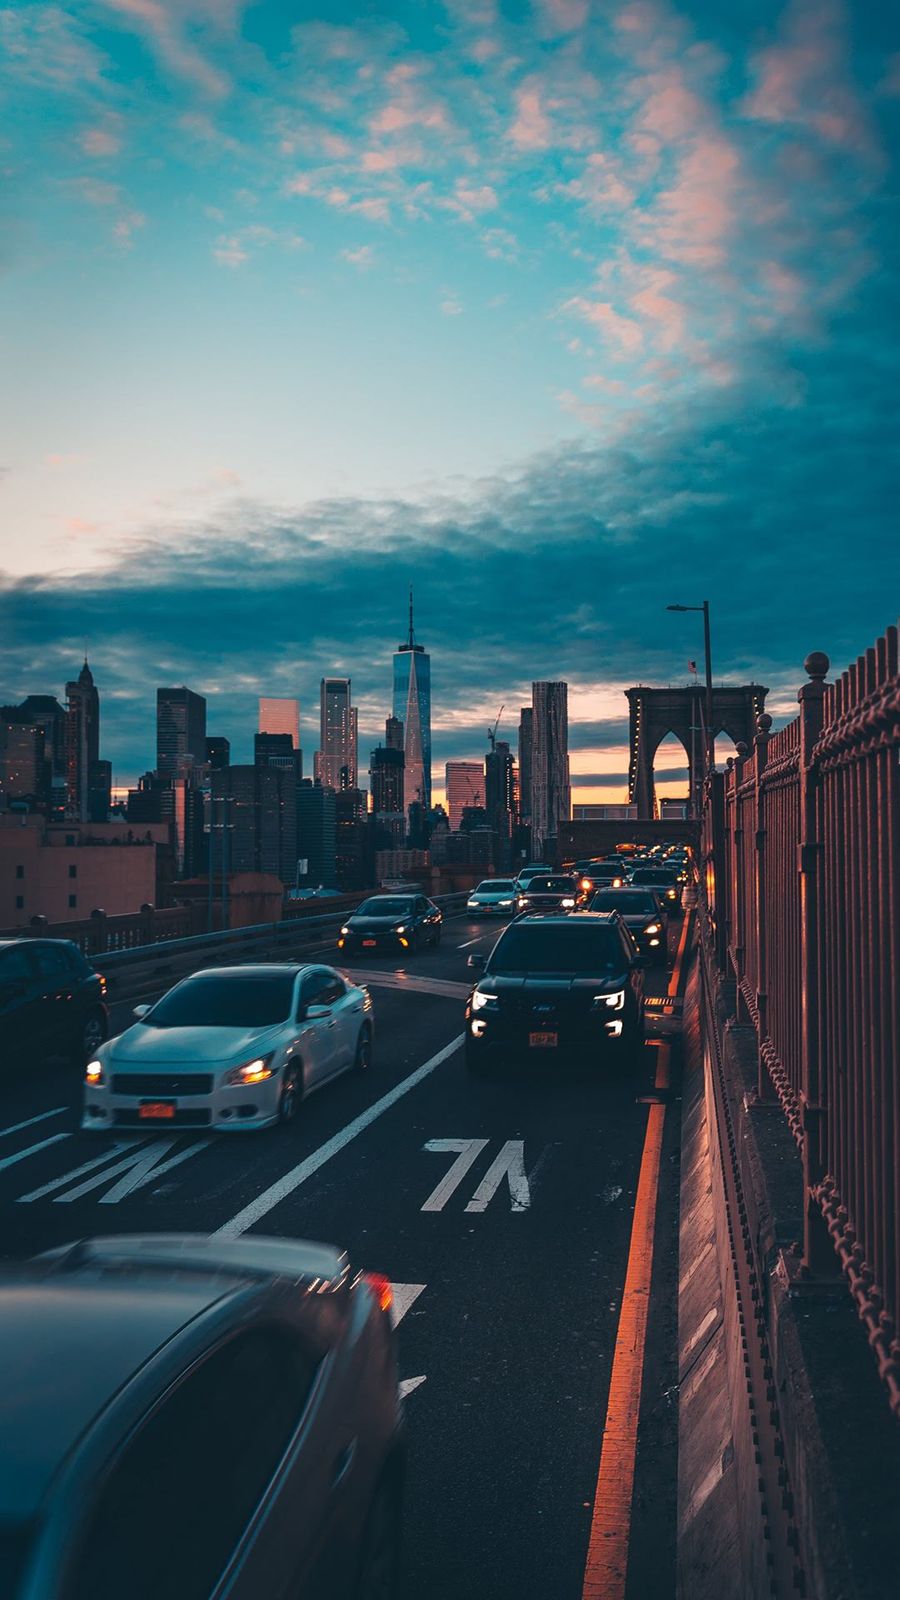 Cars on a bridge with a city skyline in the background - New York